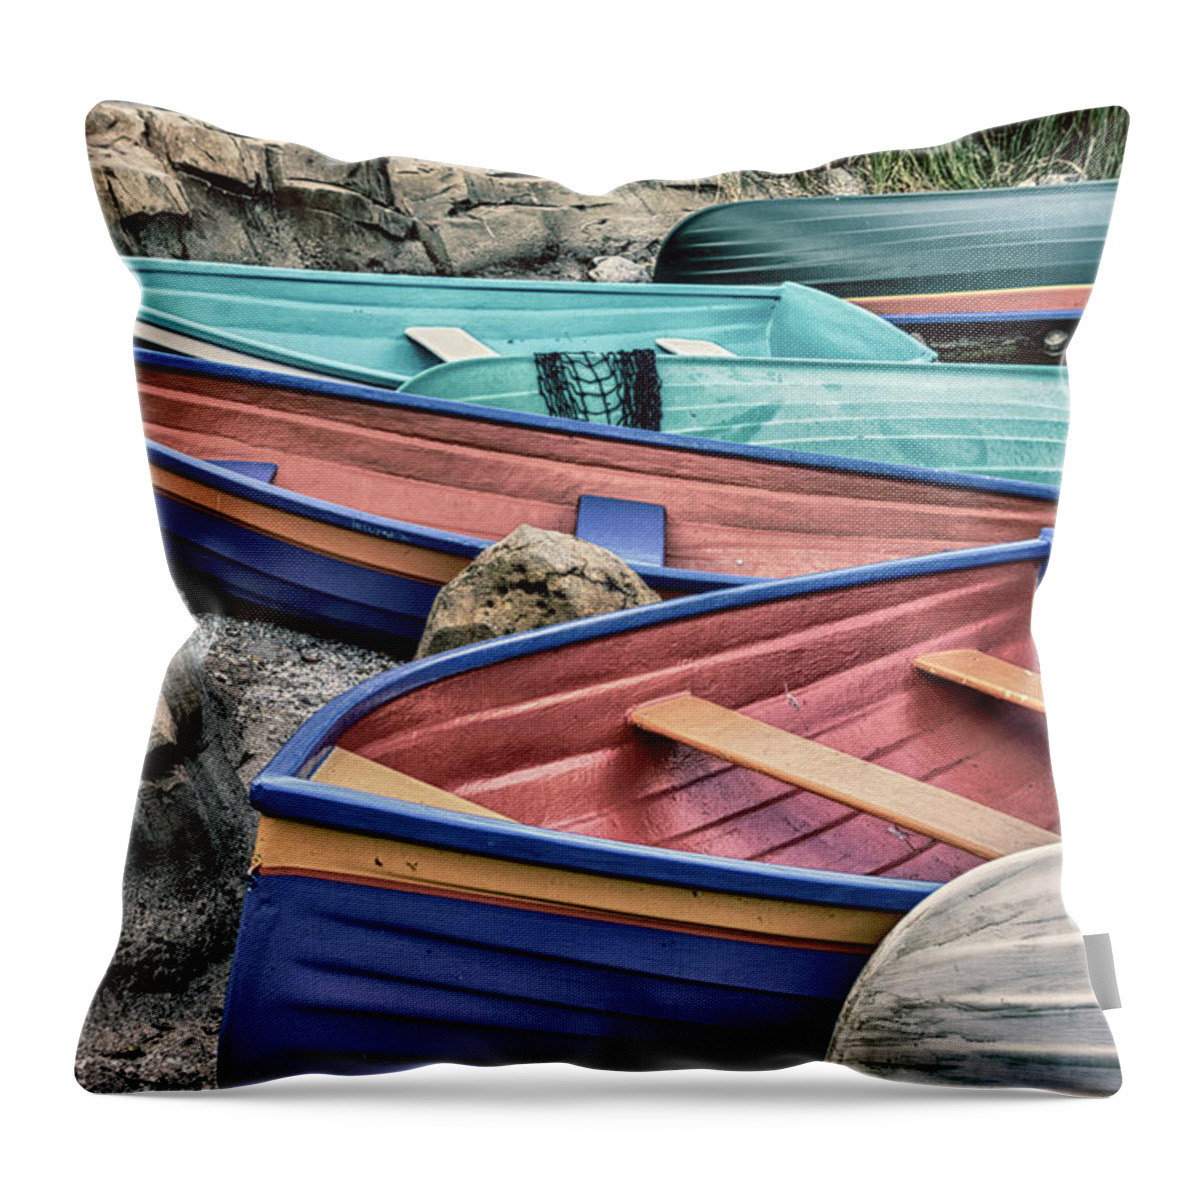 Lakeside Throw Pillow featuring the photograph Lakeside Adventures #1 by Debbie O'dell